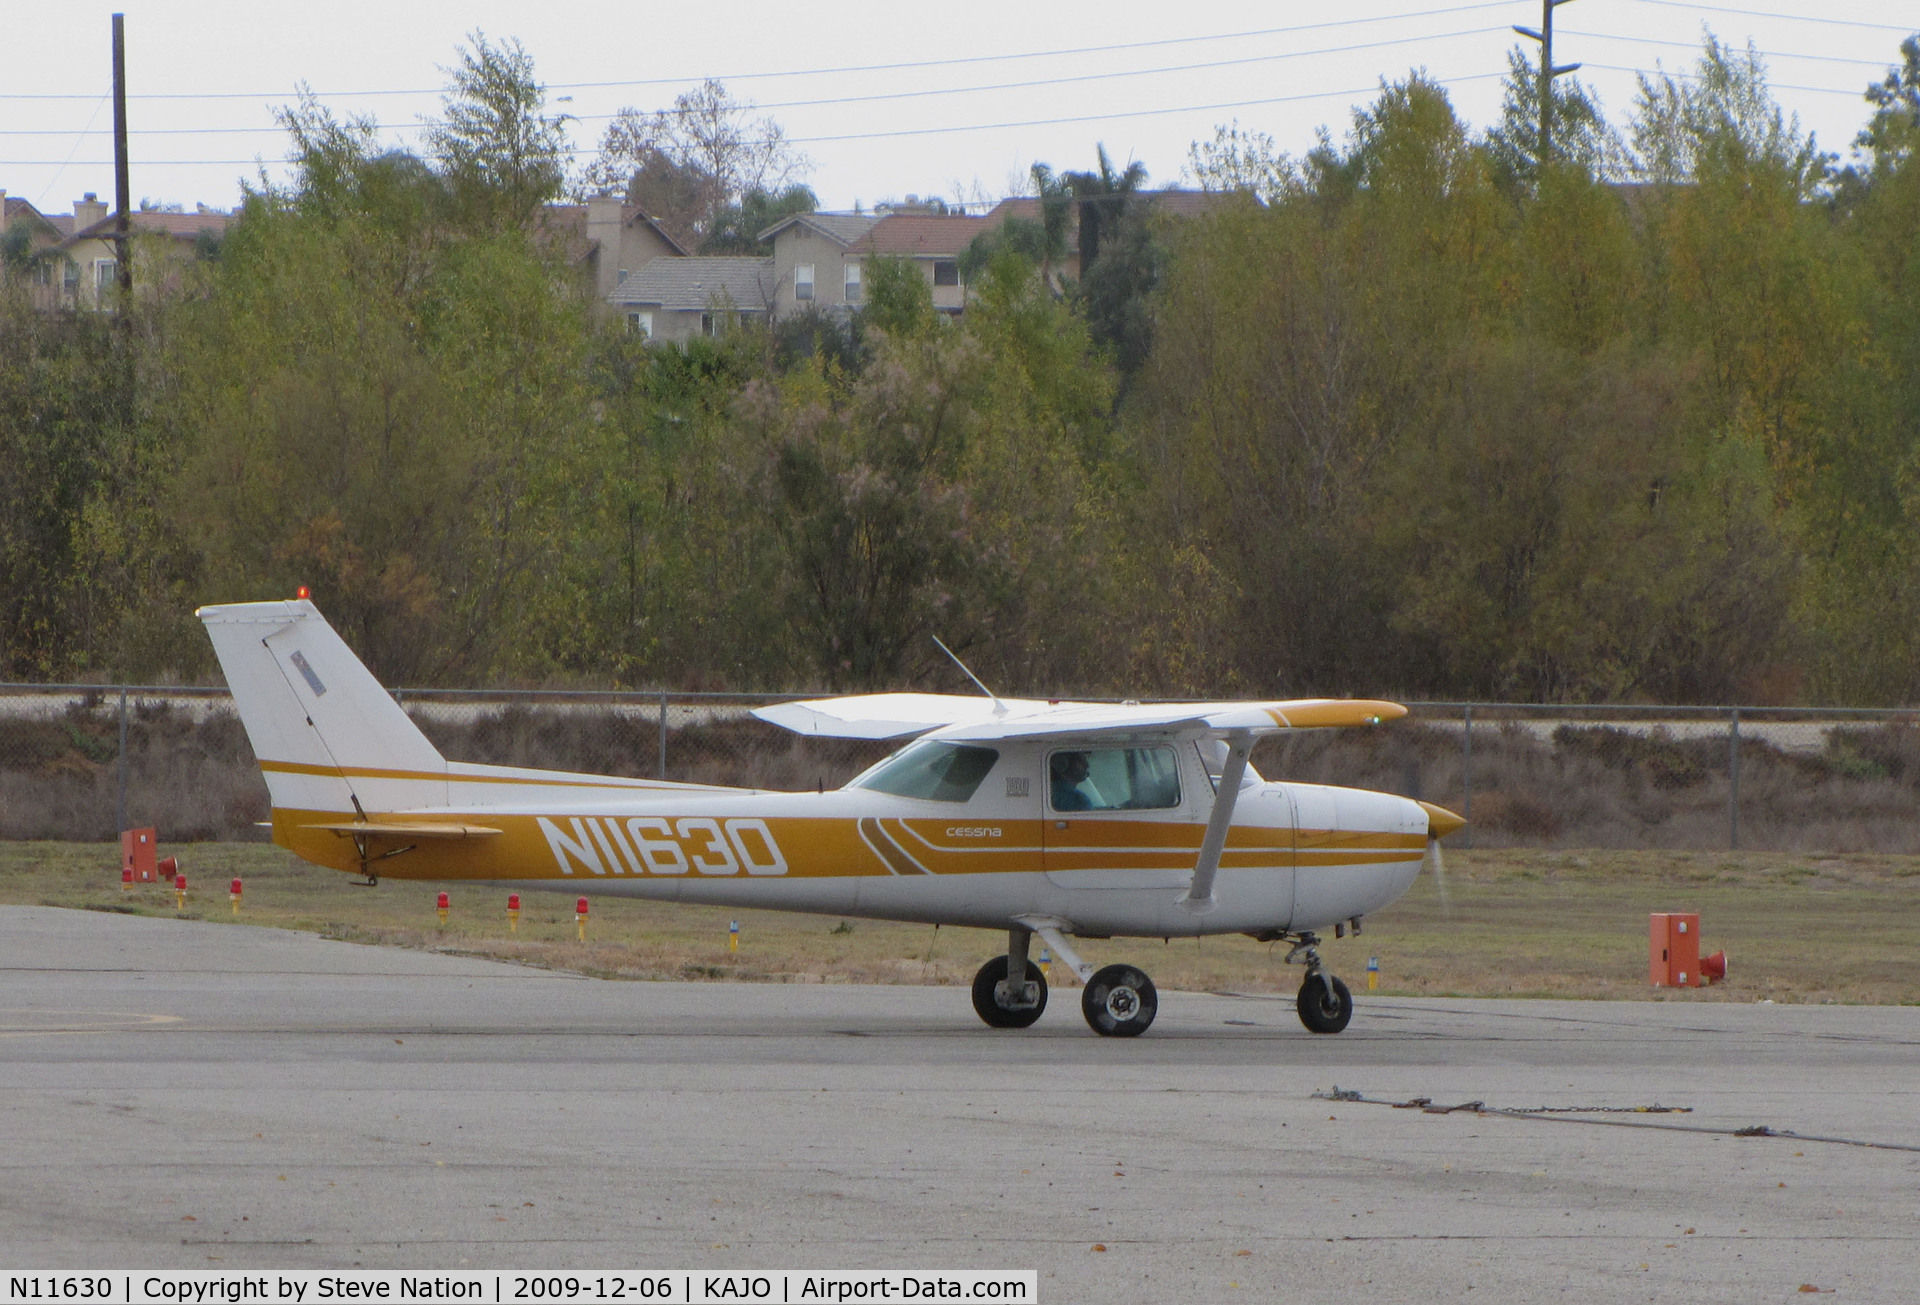 N11630, 1974 Cessna 150L C/N 15075584, Locally-based 1974 Cessna 150L taxiing  @ Corona MAP, CA (now registered to Bedrock Investments LLC, Cheyenne, WY)